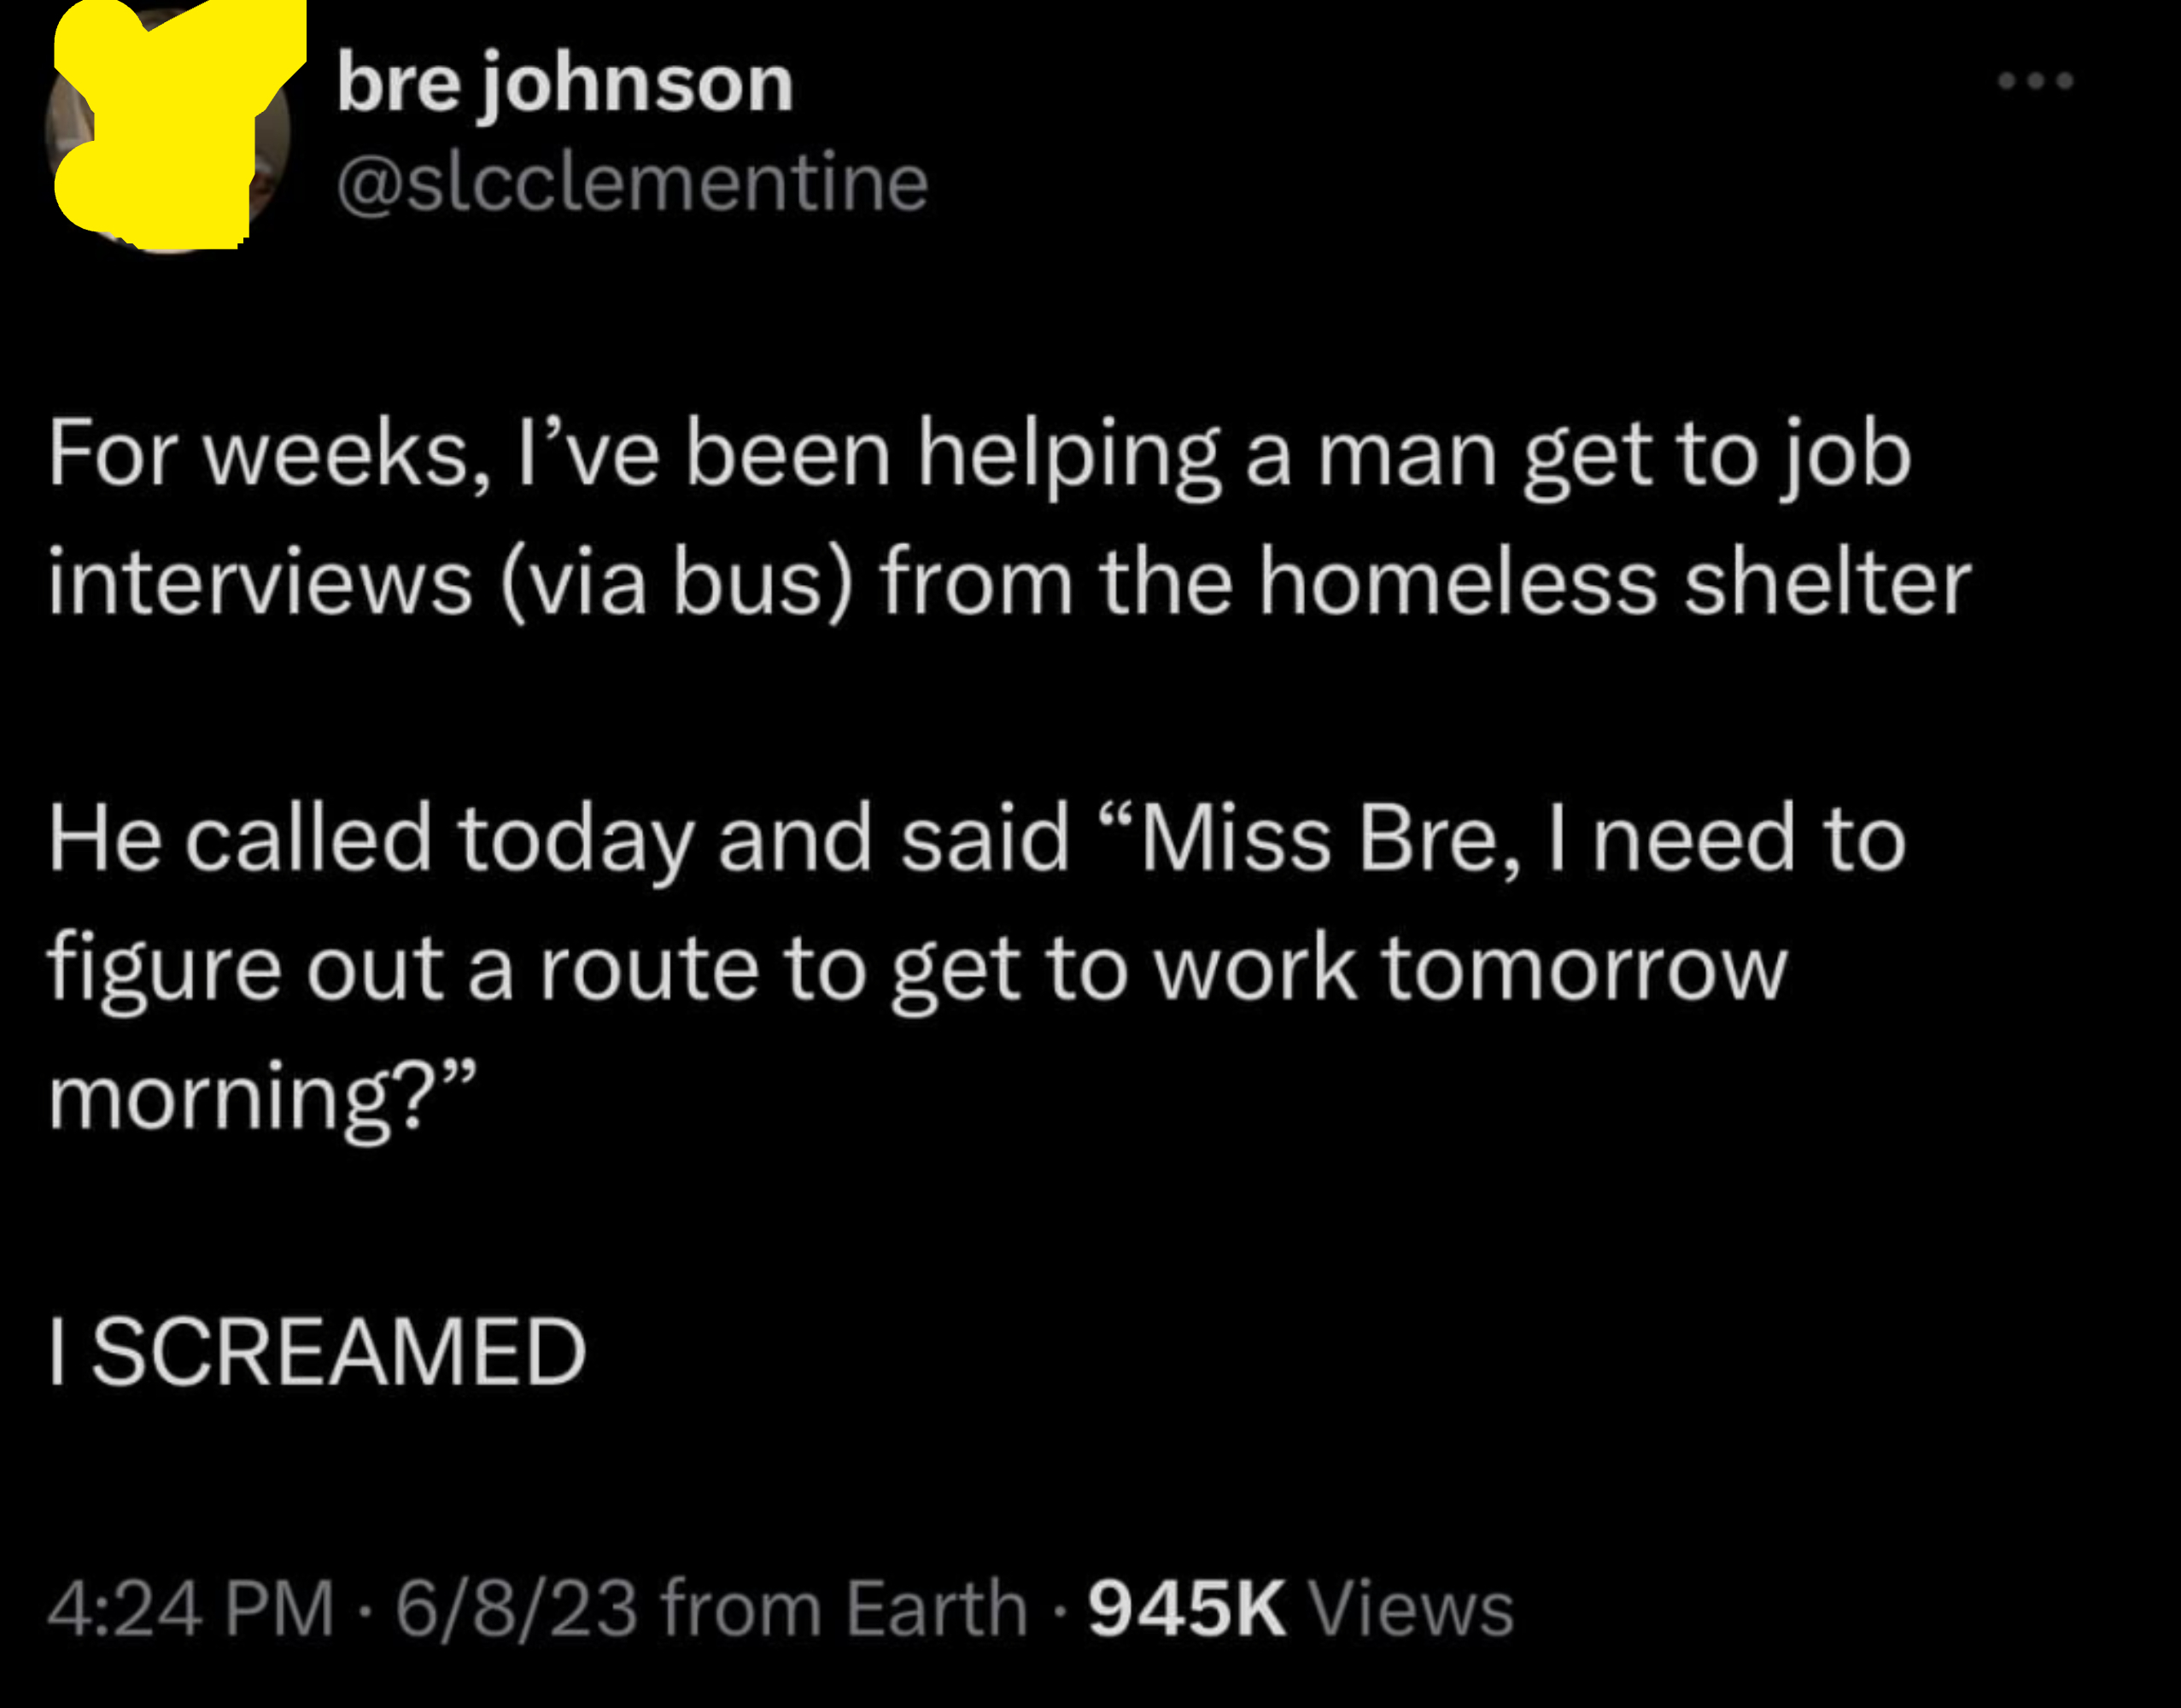 Someone helped a man &quot;from the homeless shelter&quot; get to job interviews, and he called to let her know he needs &quot;to figure out a route to get to work tomorrow morning,&quot; and she screamed